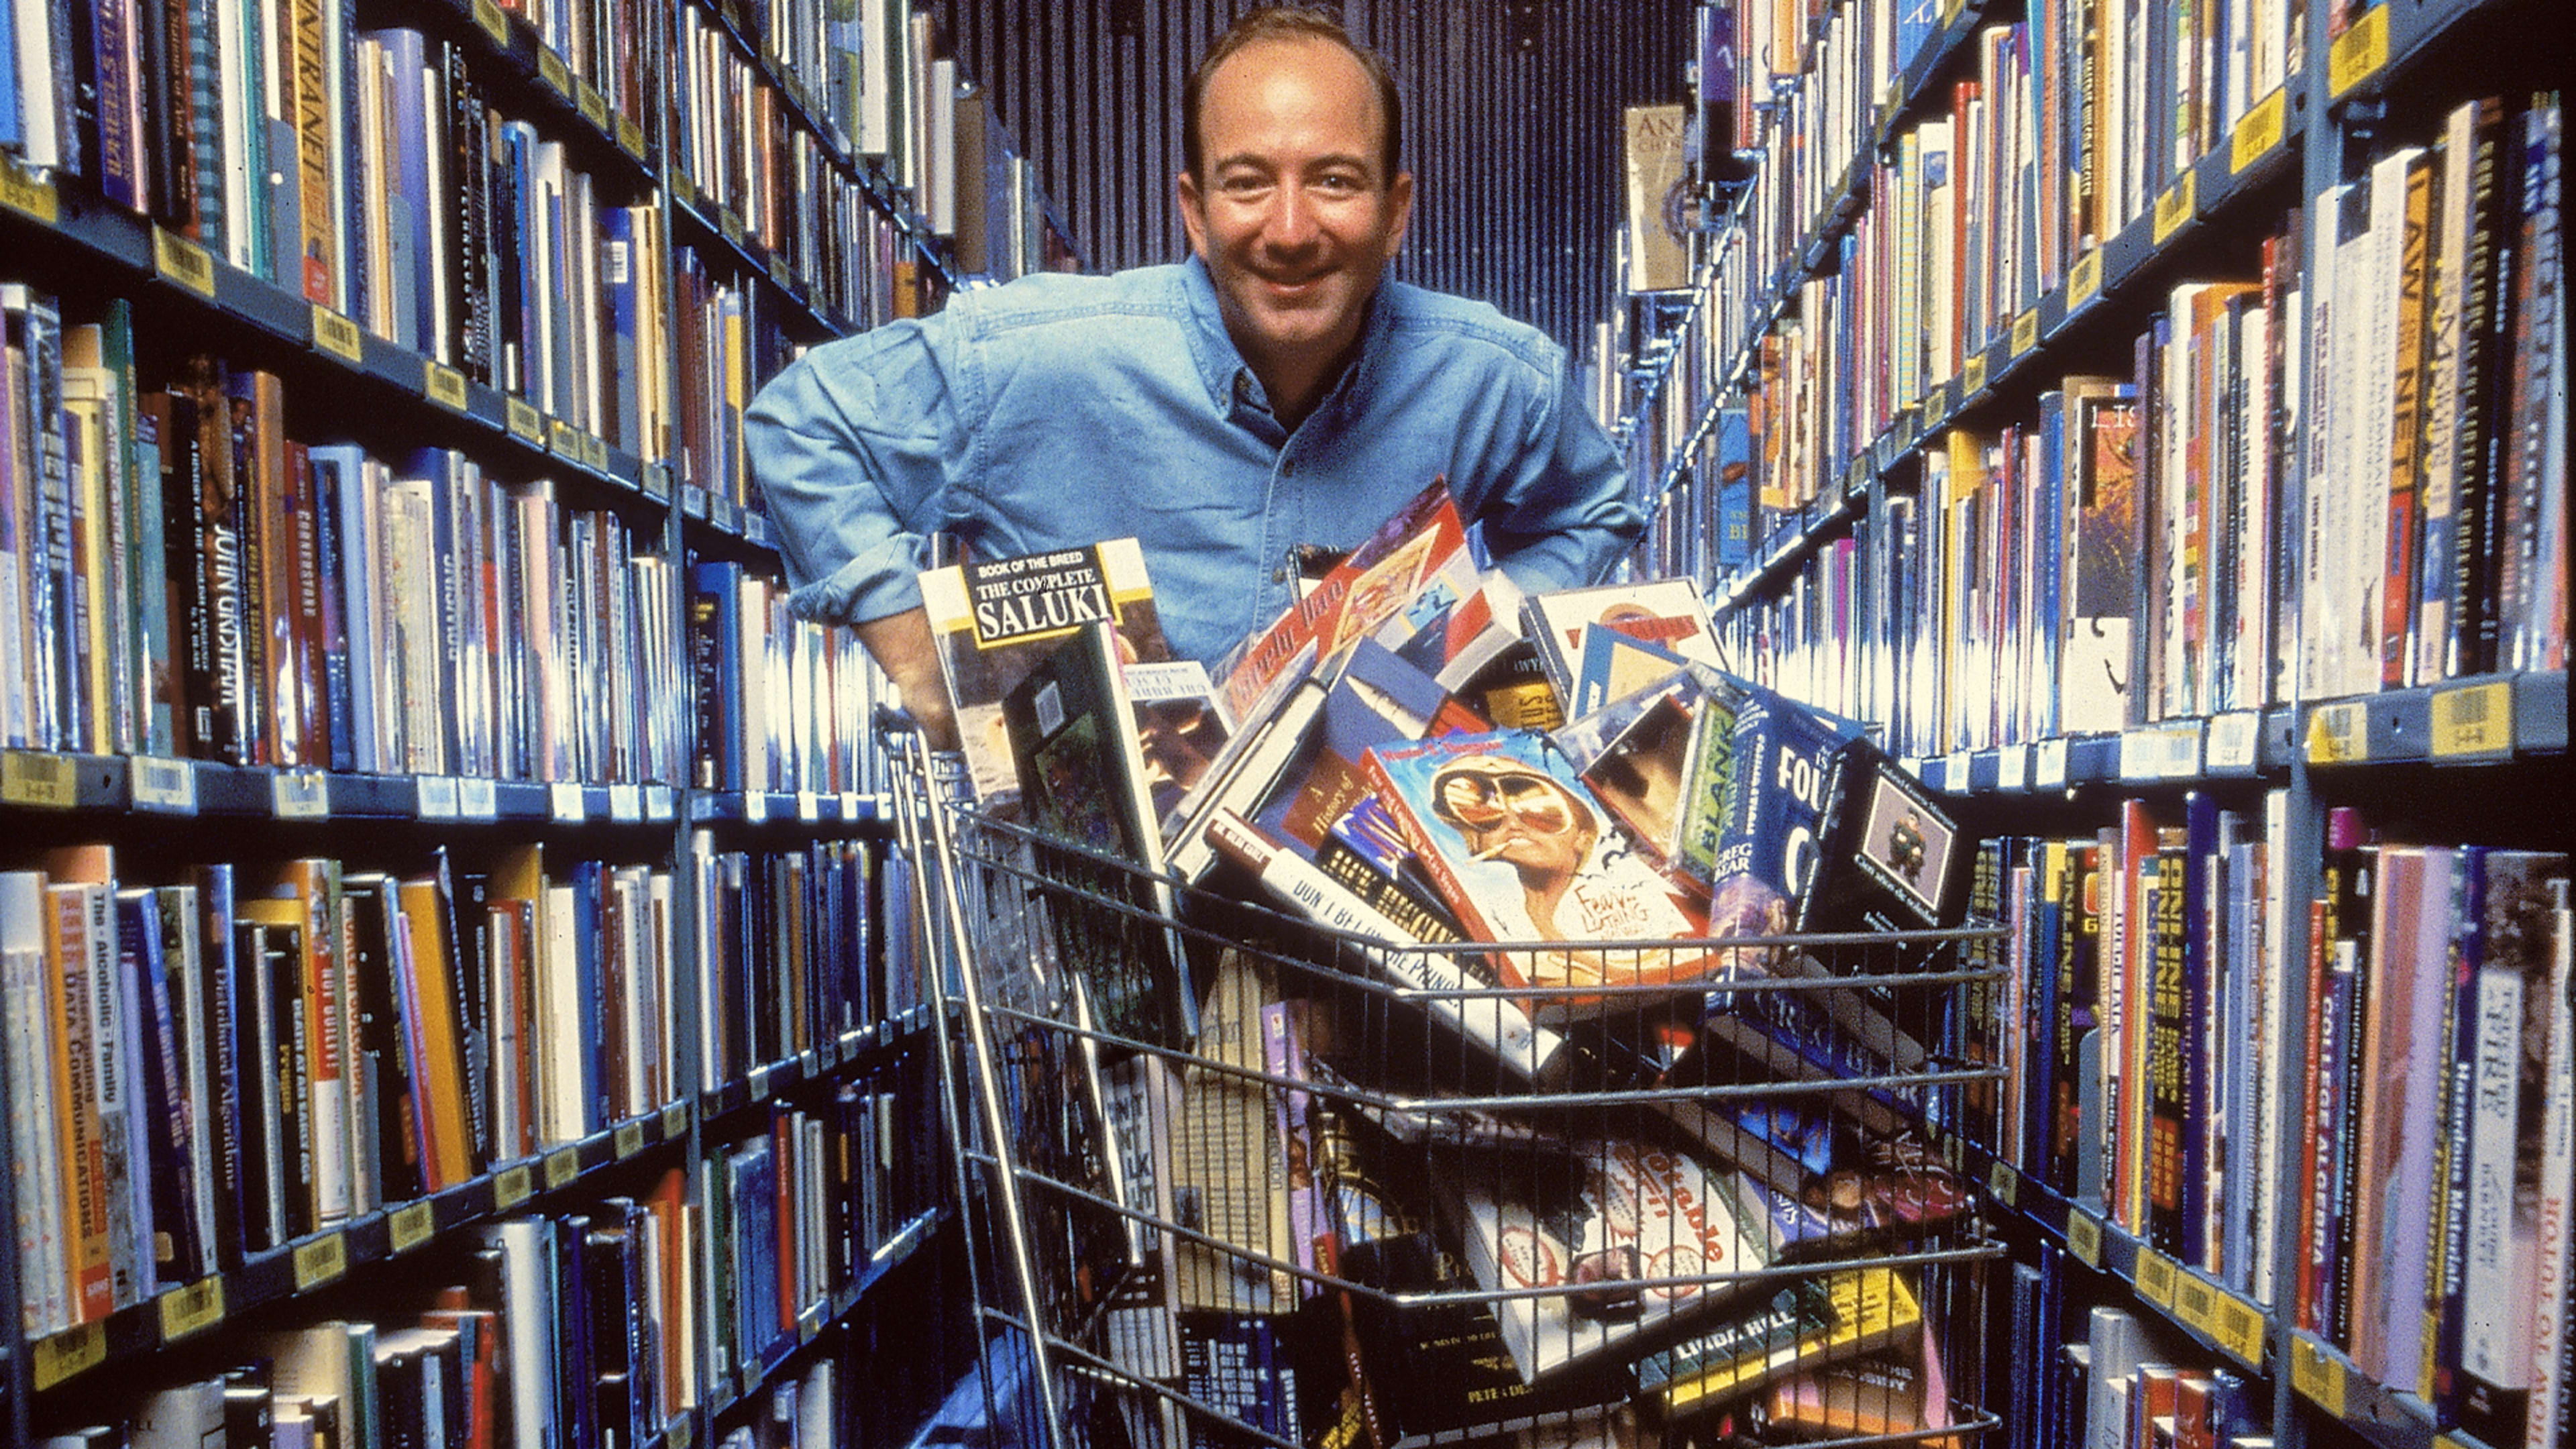 These are Amazon’s 38 rules for success